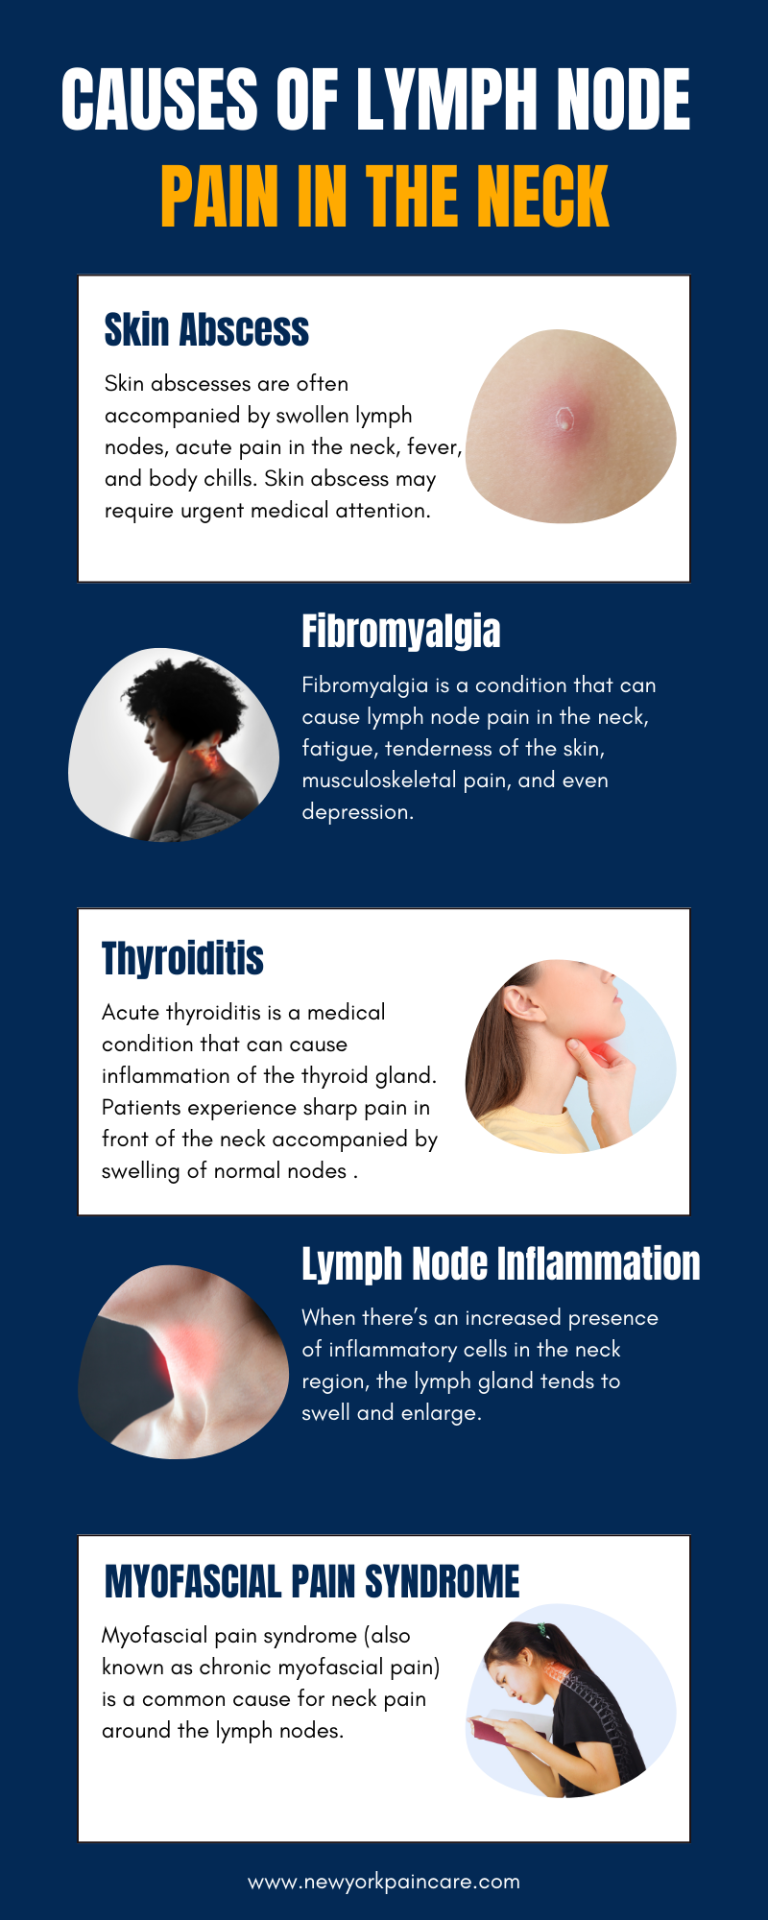 Causes of Lymph Node Pain in the Neck 768x1920